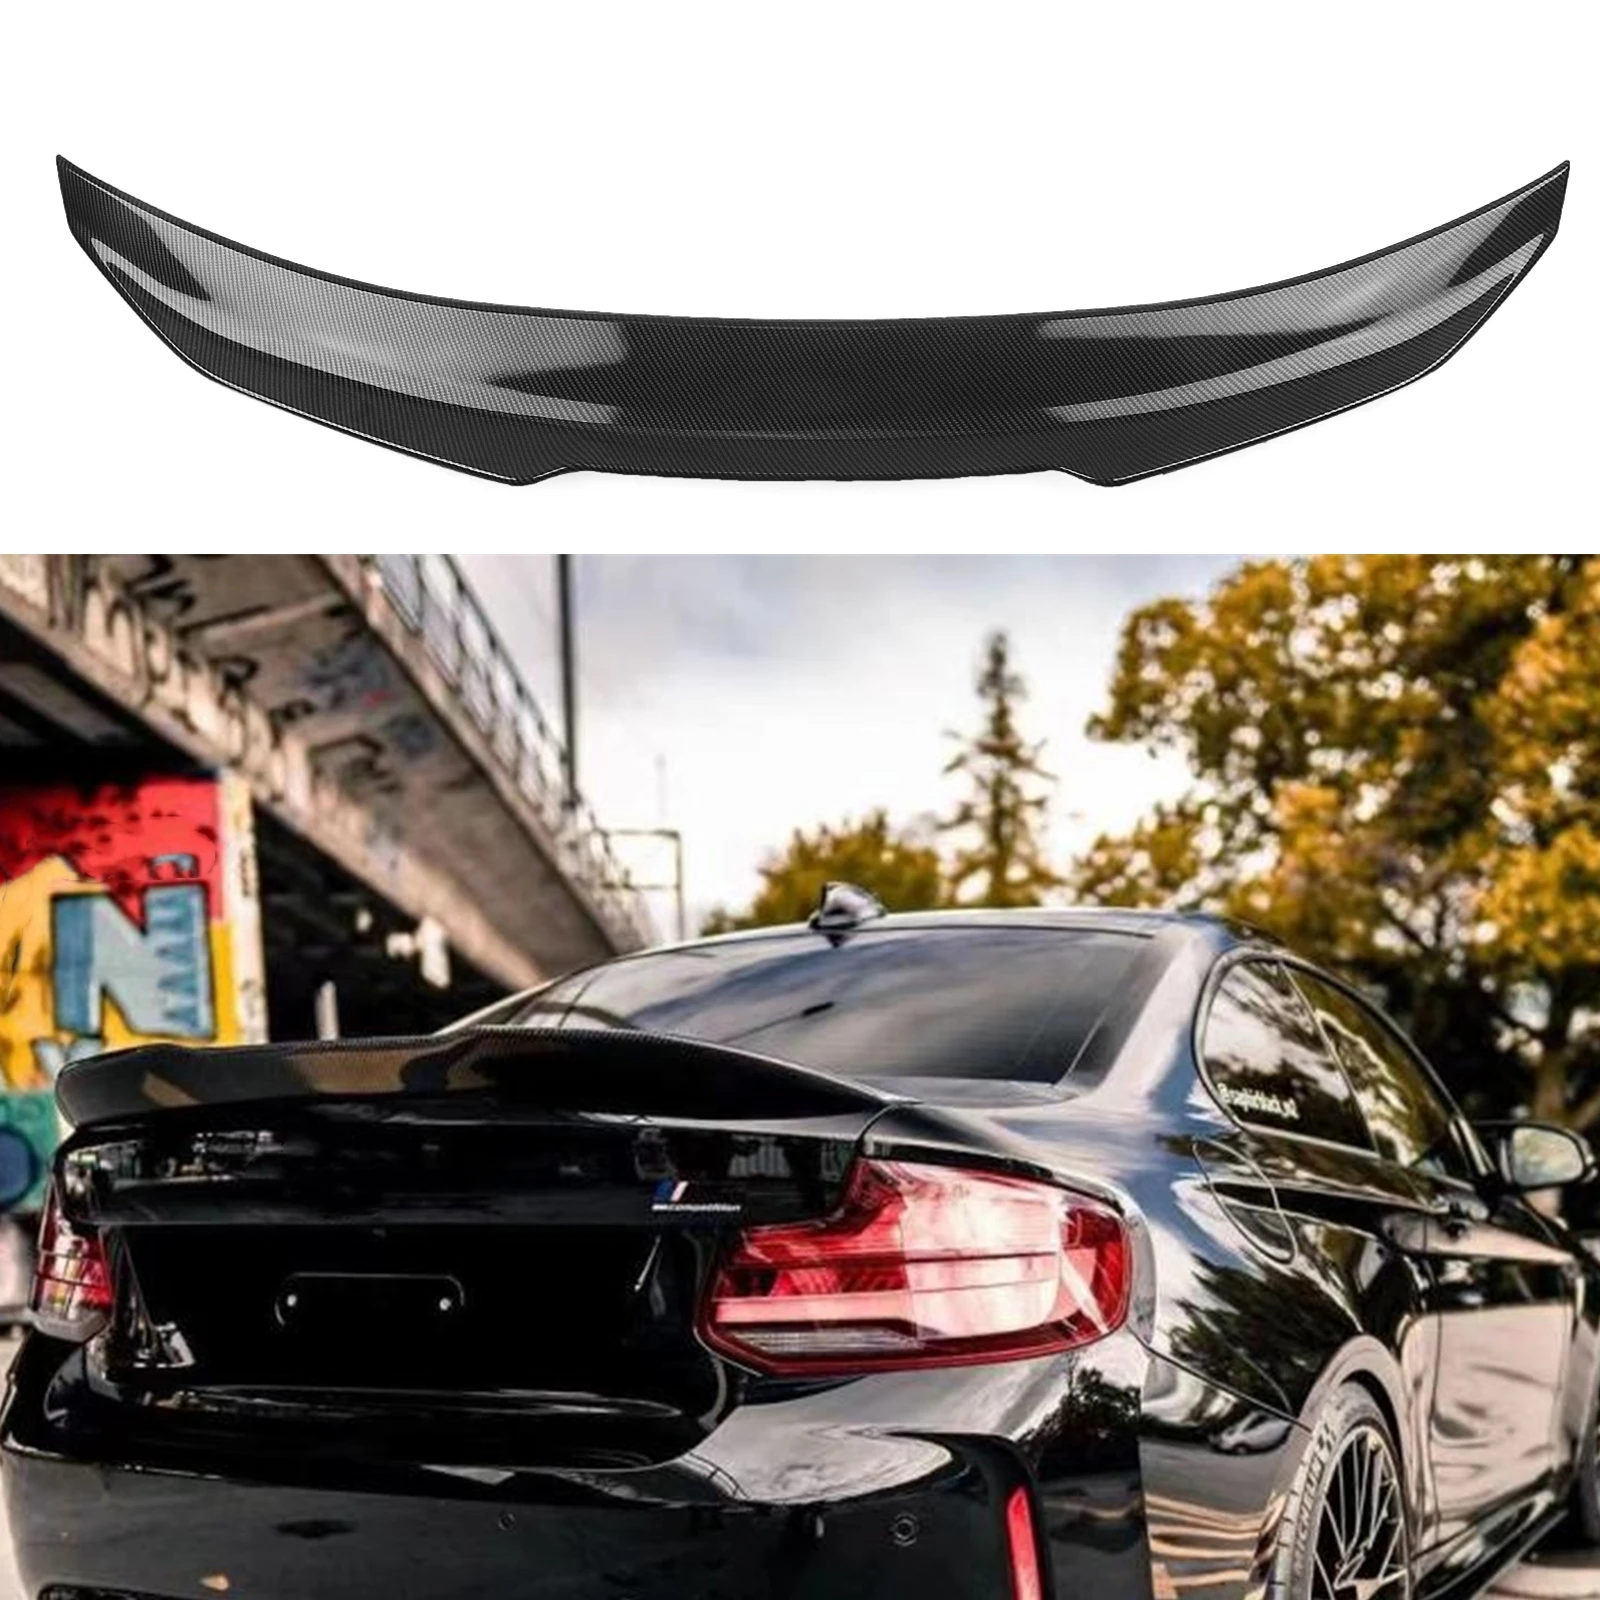 Car Rear Trunk Wing Lid Spoiler Splitter Duckbill Flap Flare Lip For BMW 2 Series F22 F87 M2 Coupe 2014-2019 PSM Style